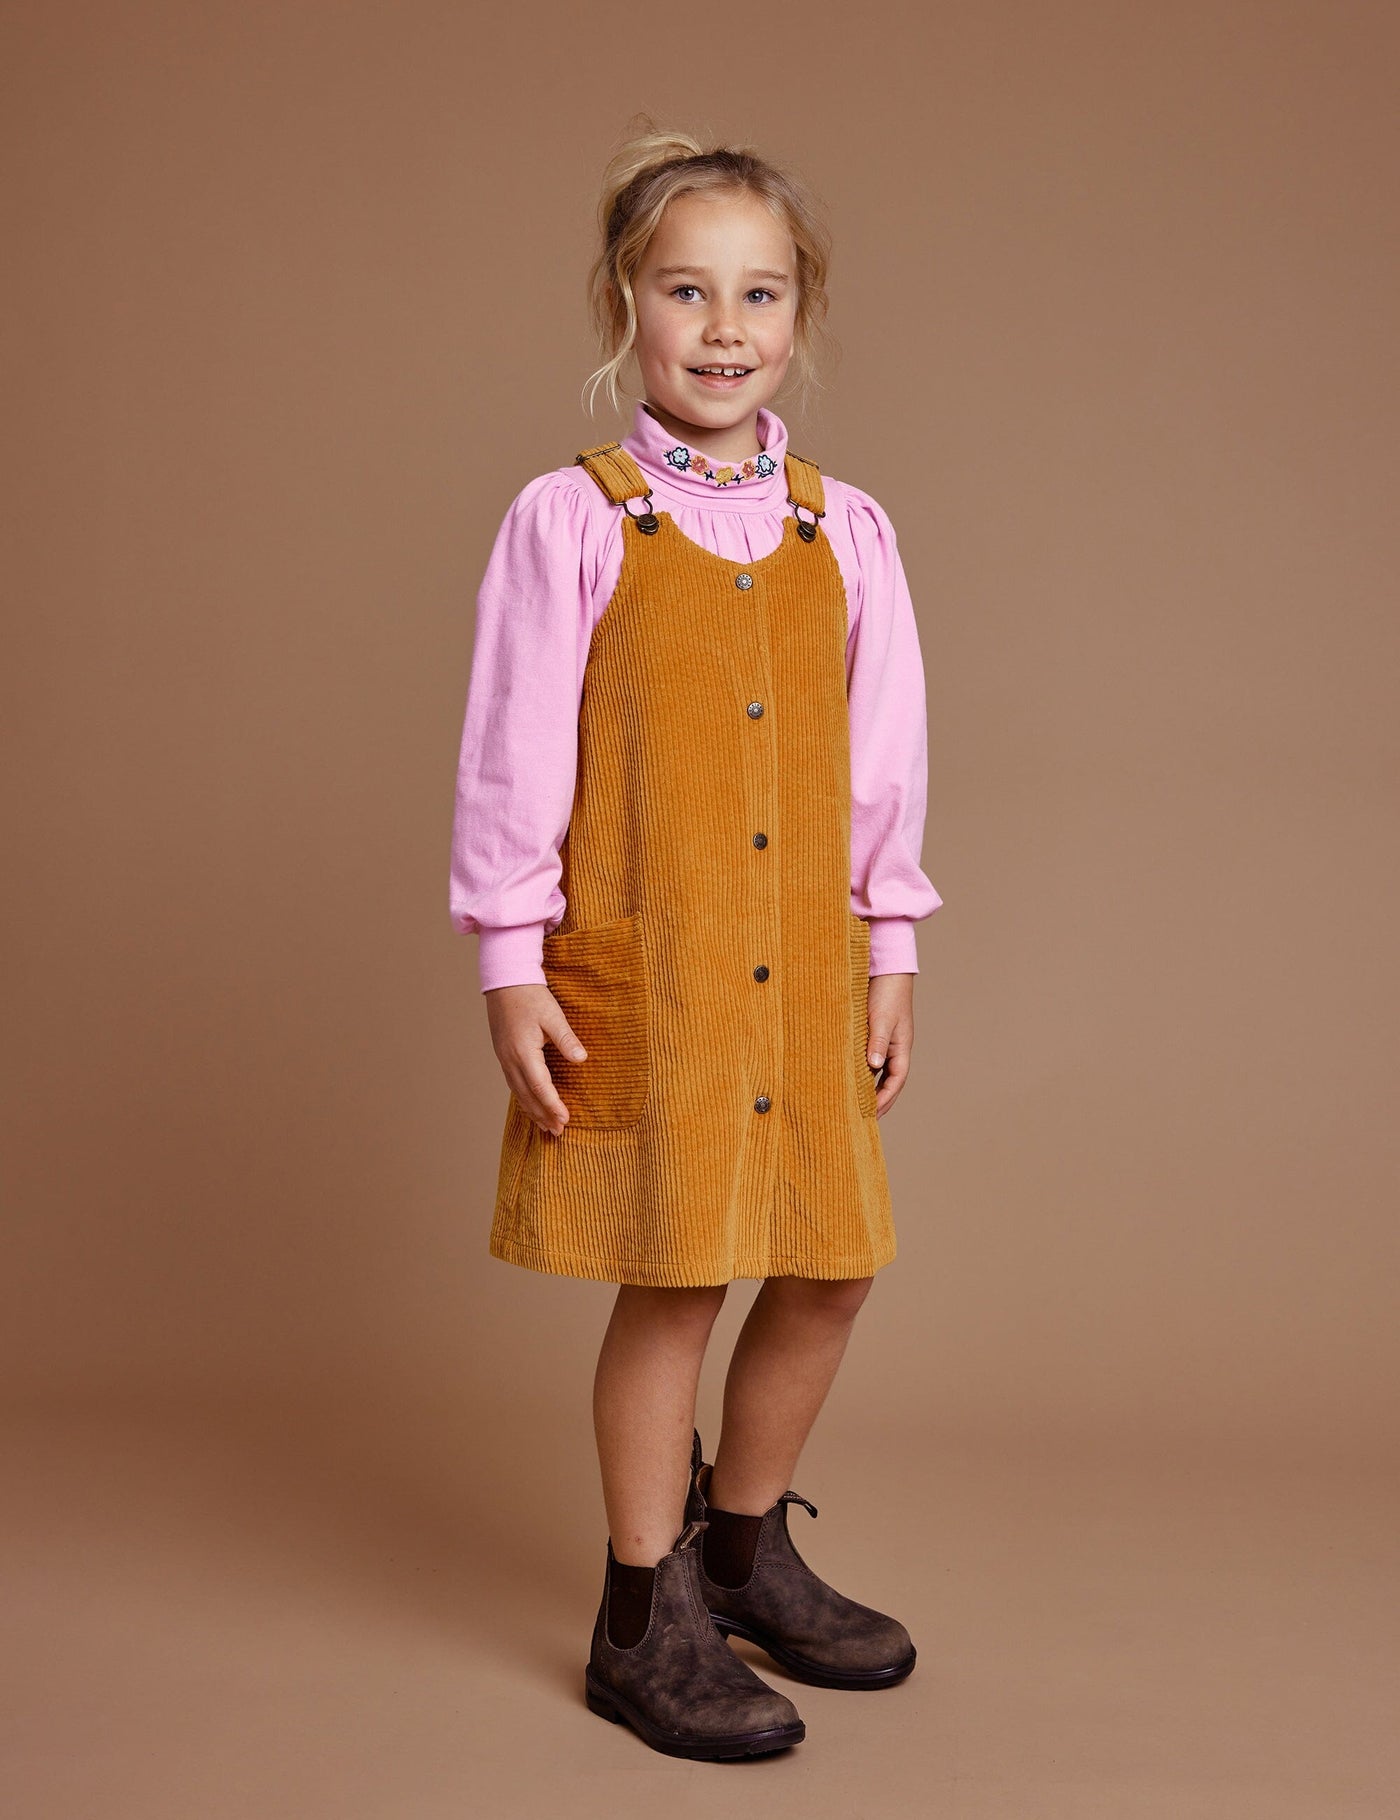 Goldie & Ace Polly Corduroy Pinafore Dress - Golden Sleeveless Dress Goldie & Ace 